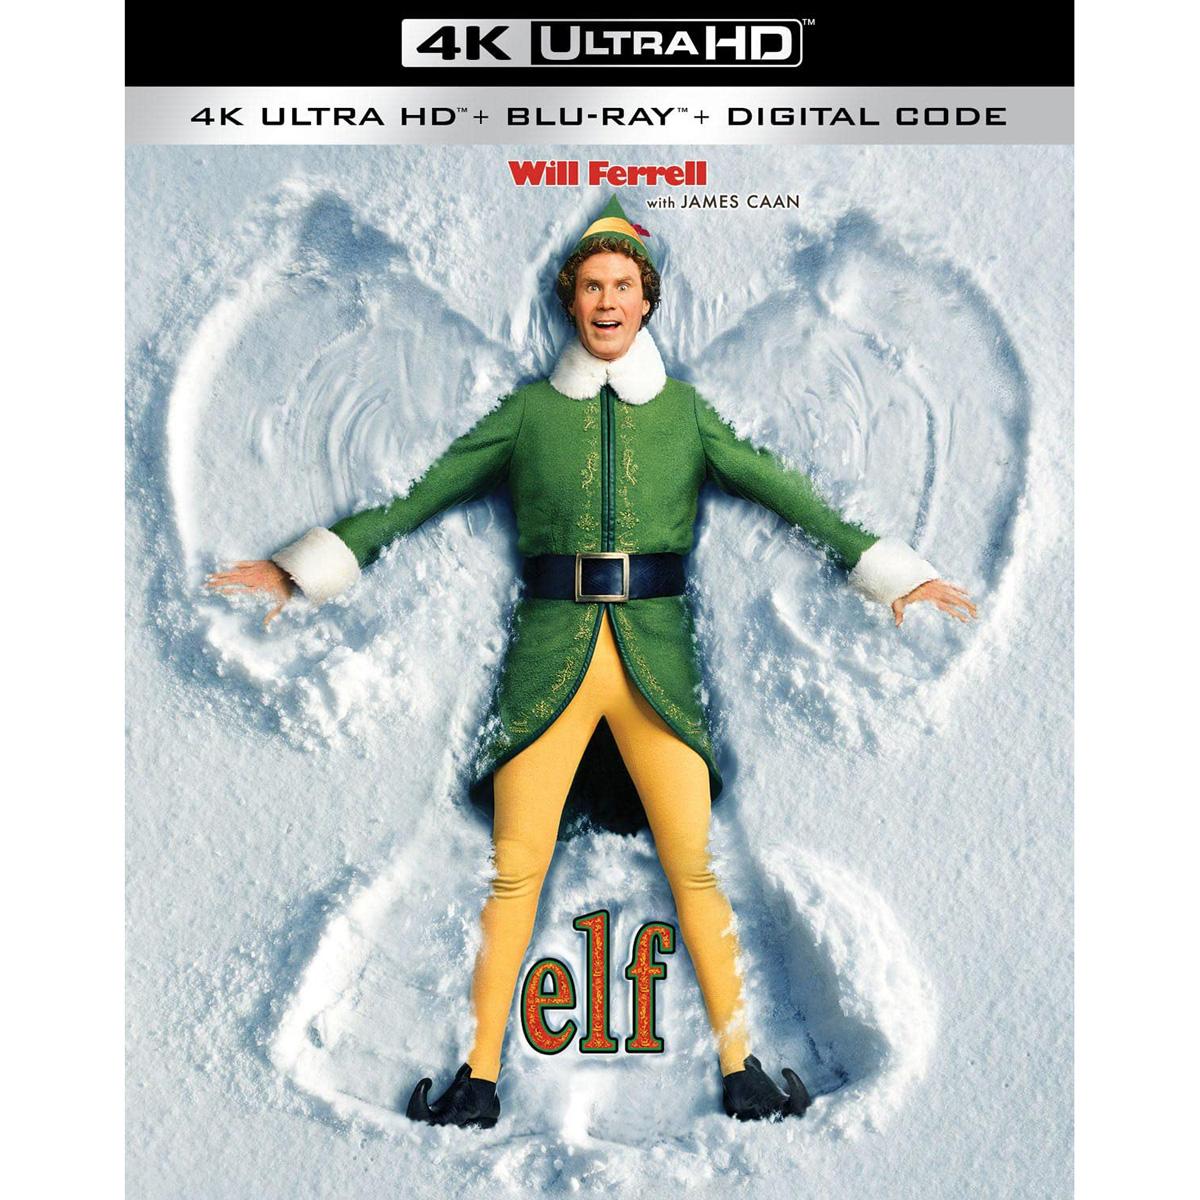 Elf 4K Blu-ray for $9.99